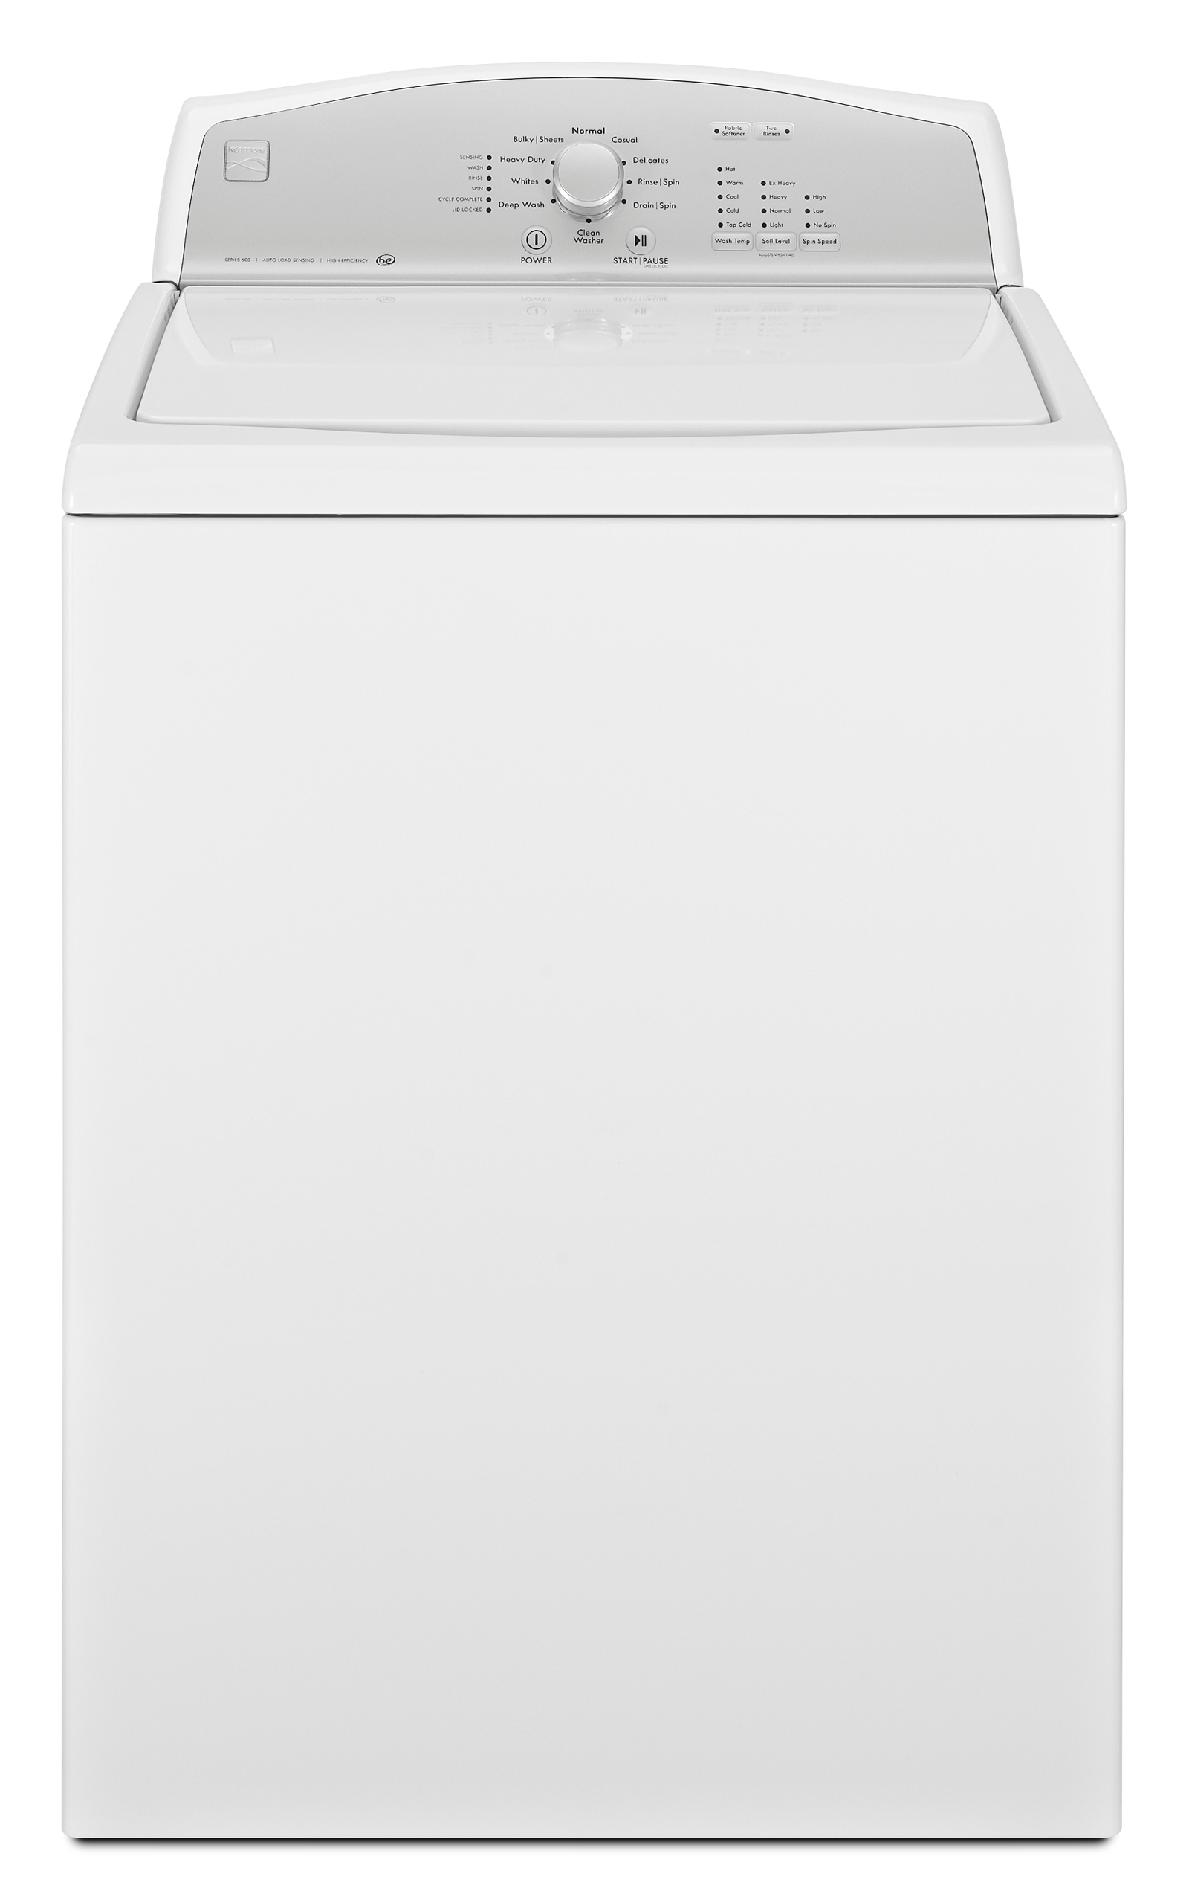 Kenmore 3.8 cu. ft. High-Efficiency Top-Load Washer w/ Deep Wash - White